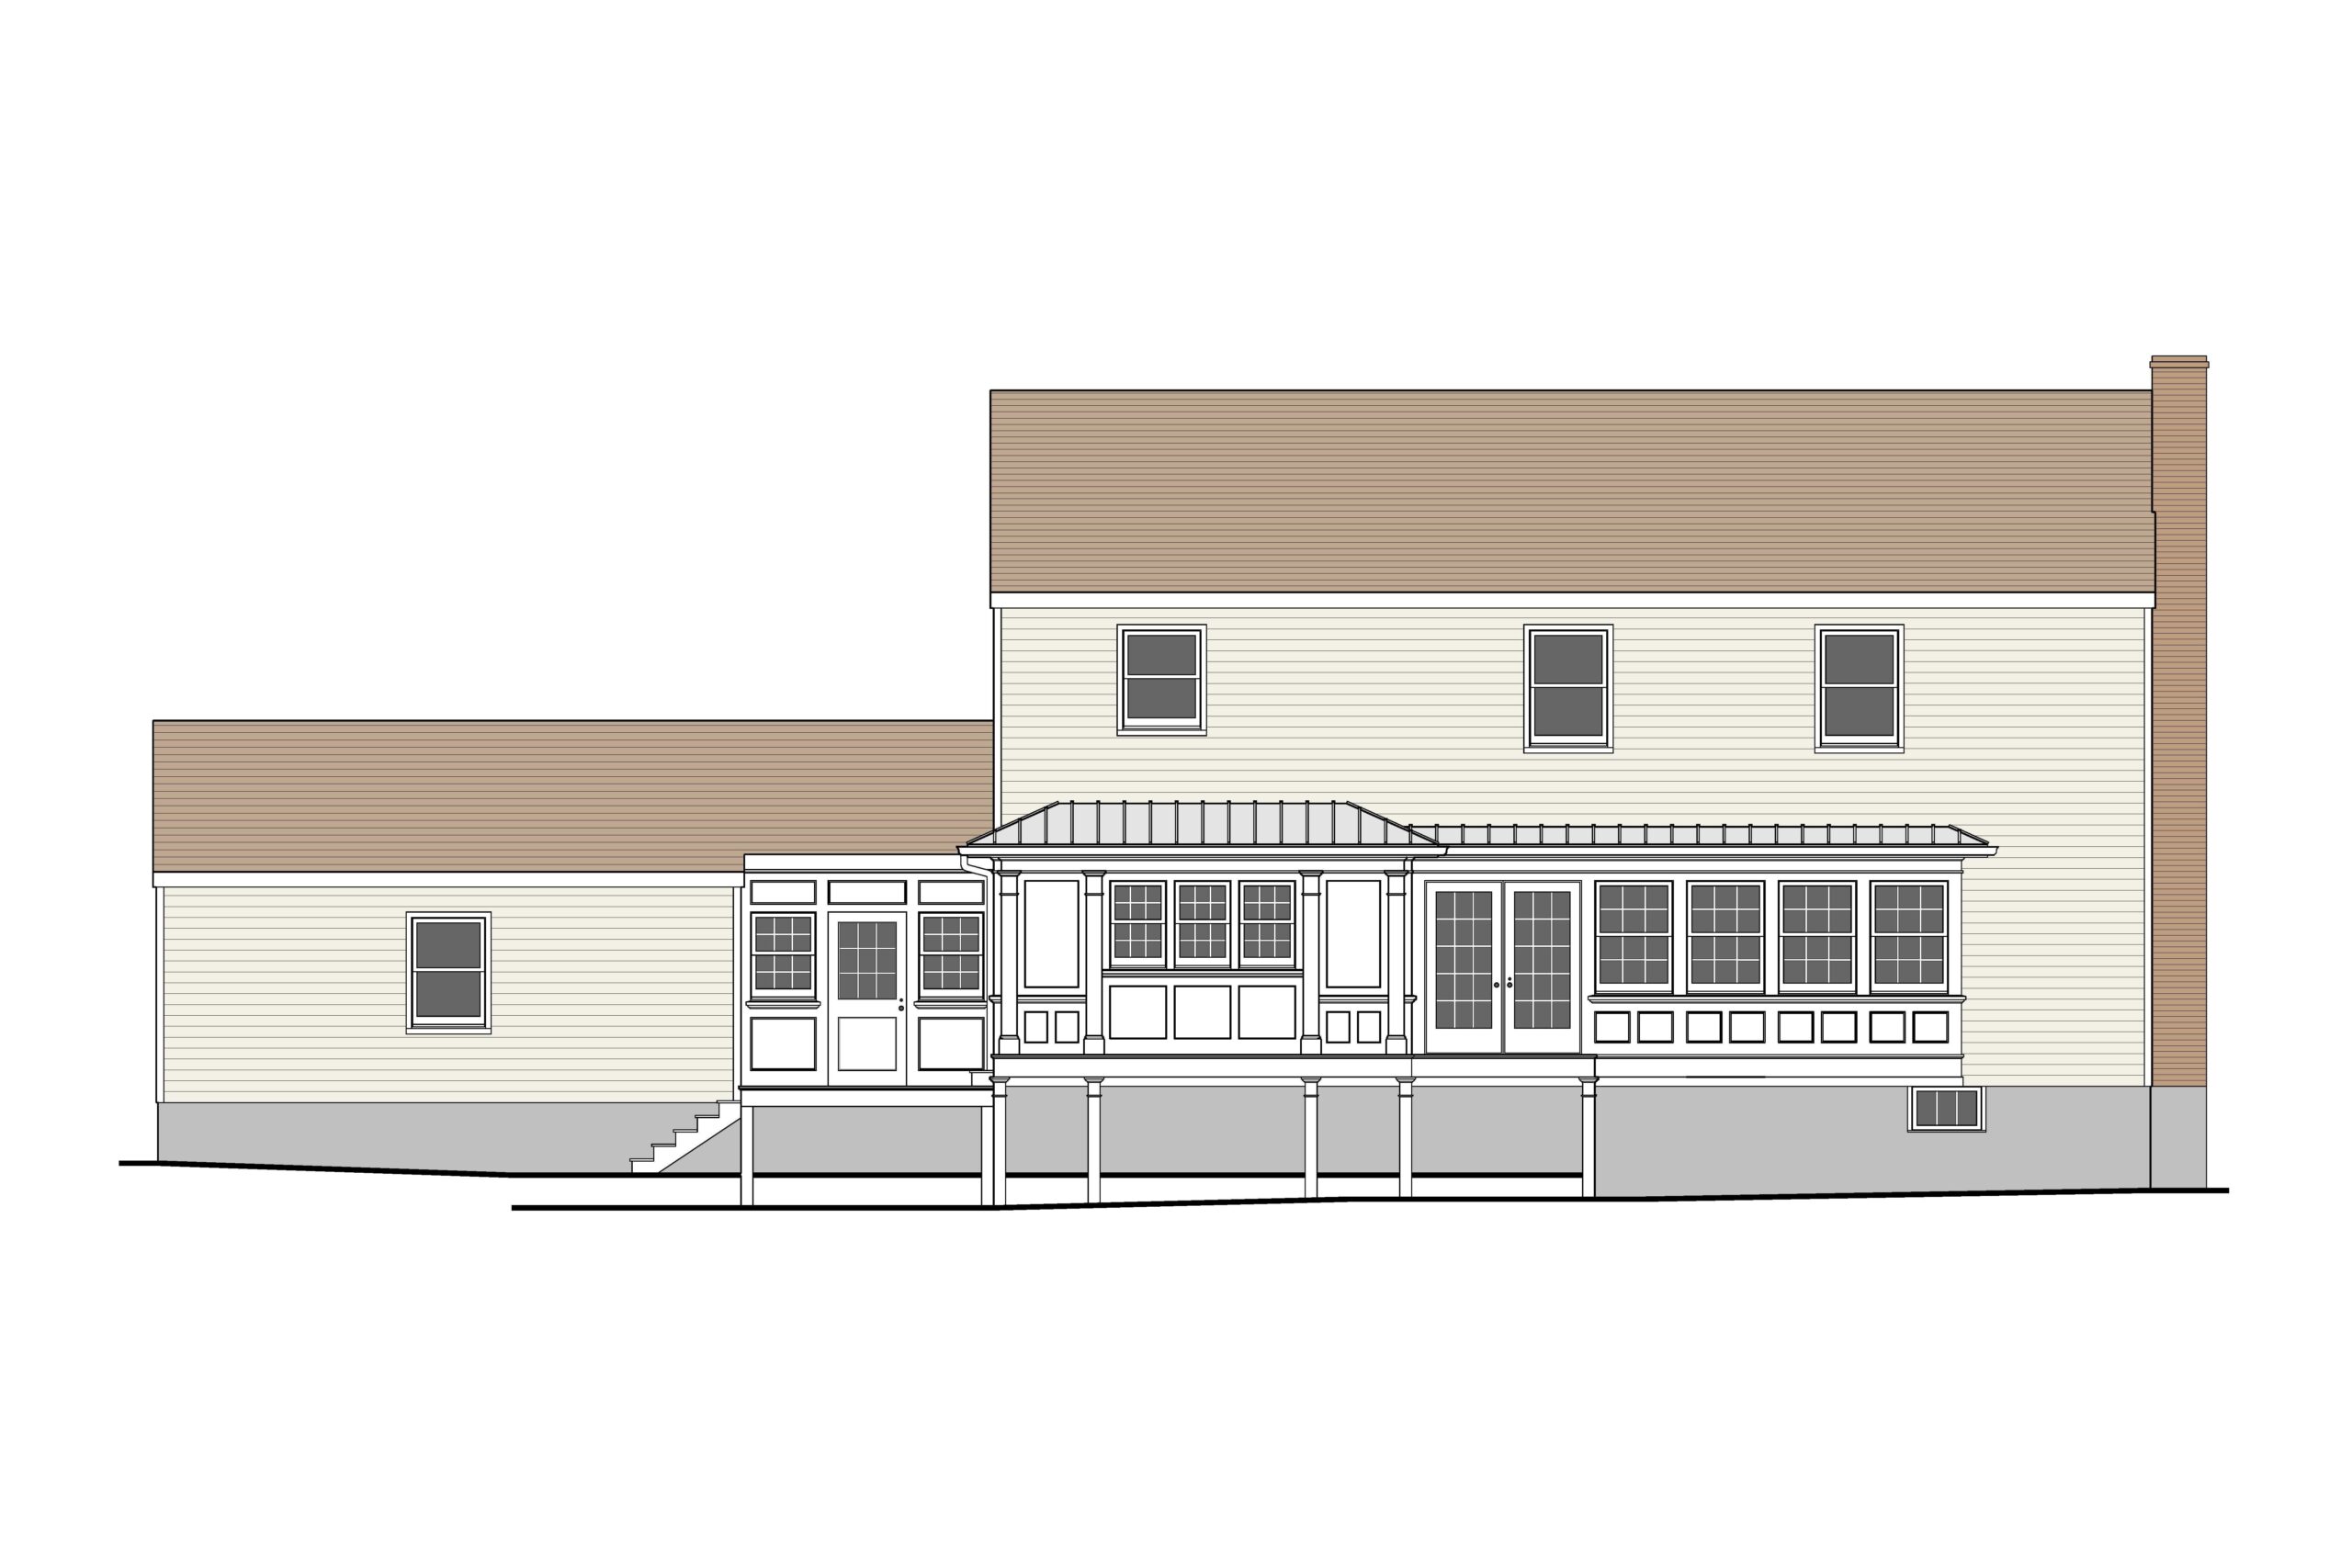 Accessibility Addition Proposed Rear Facade